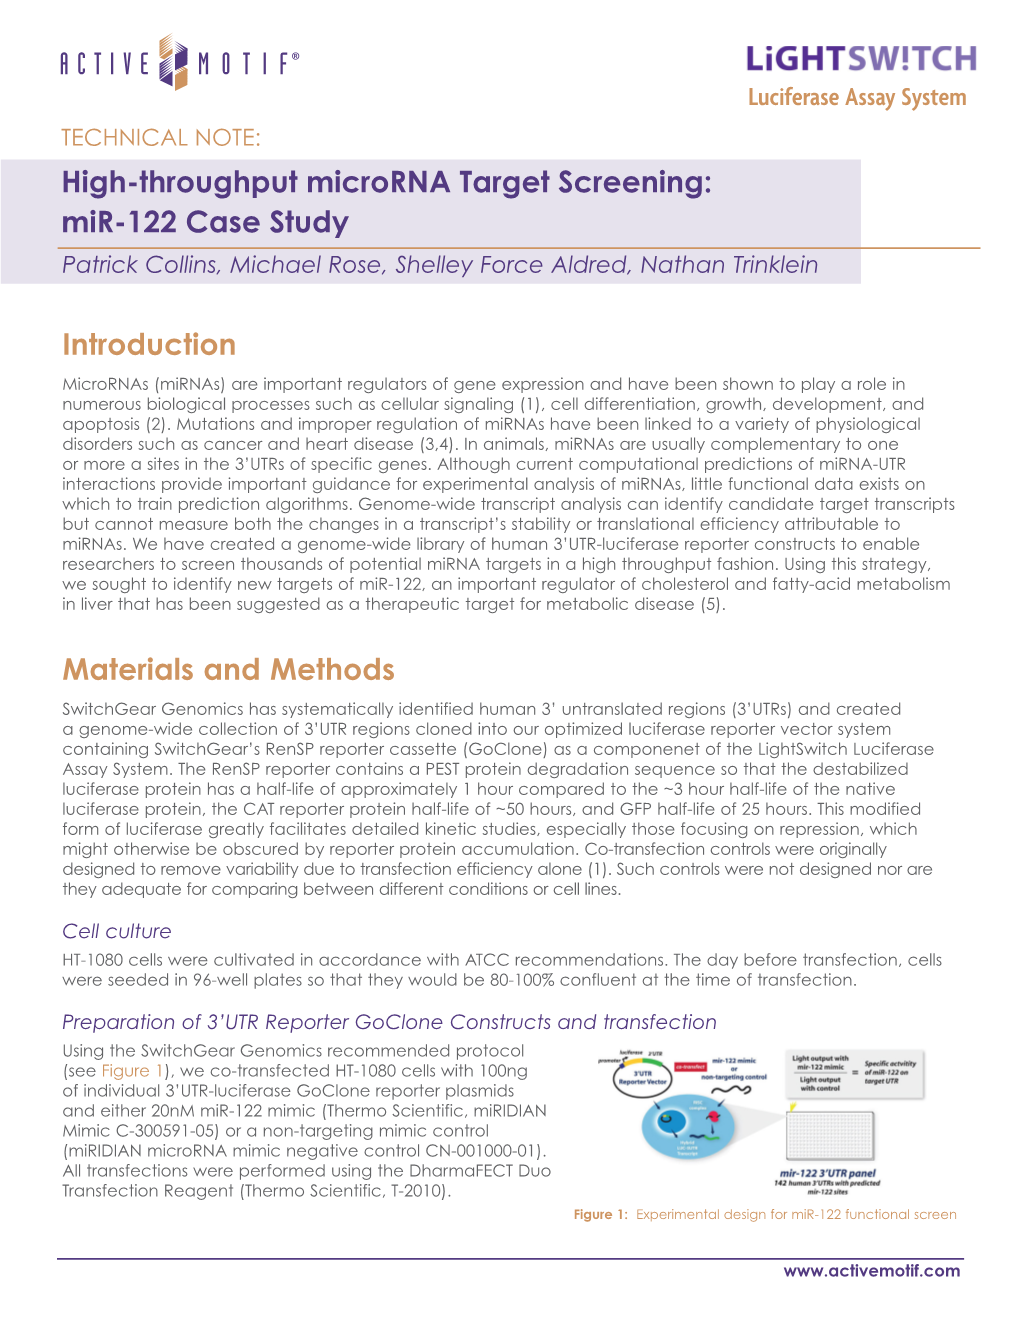 High-Throughput Microrna Target Screening: Mir-122 Case Study Patrick Collins, Michael Rose, Shelley Force Aldred, Nathan Trinklein